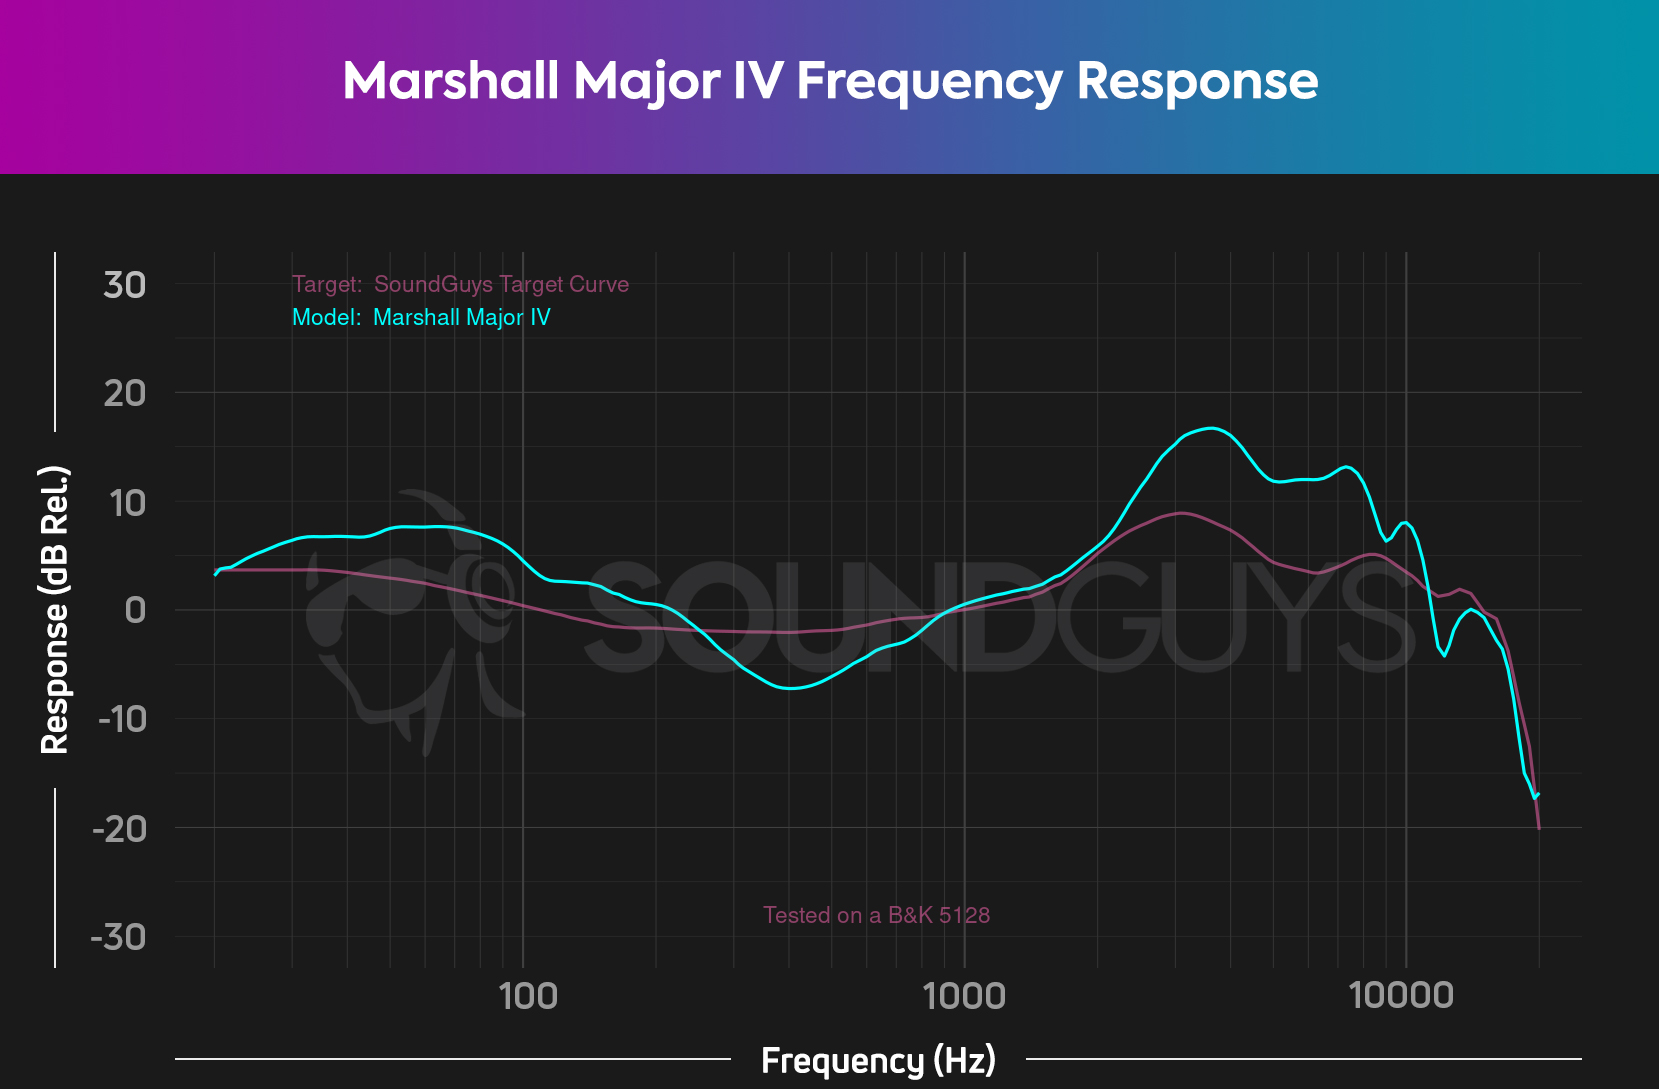 The Marshall Major IV frequency response as compared to the SoundGuys target frequency response.